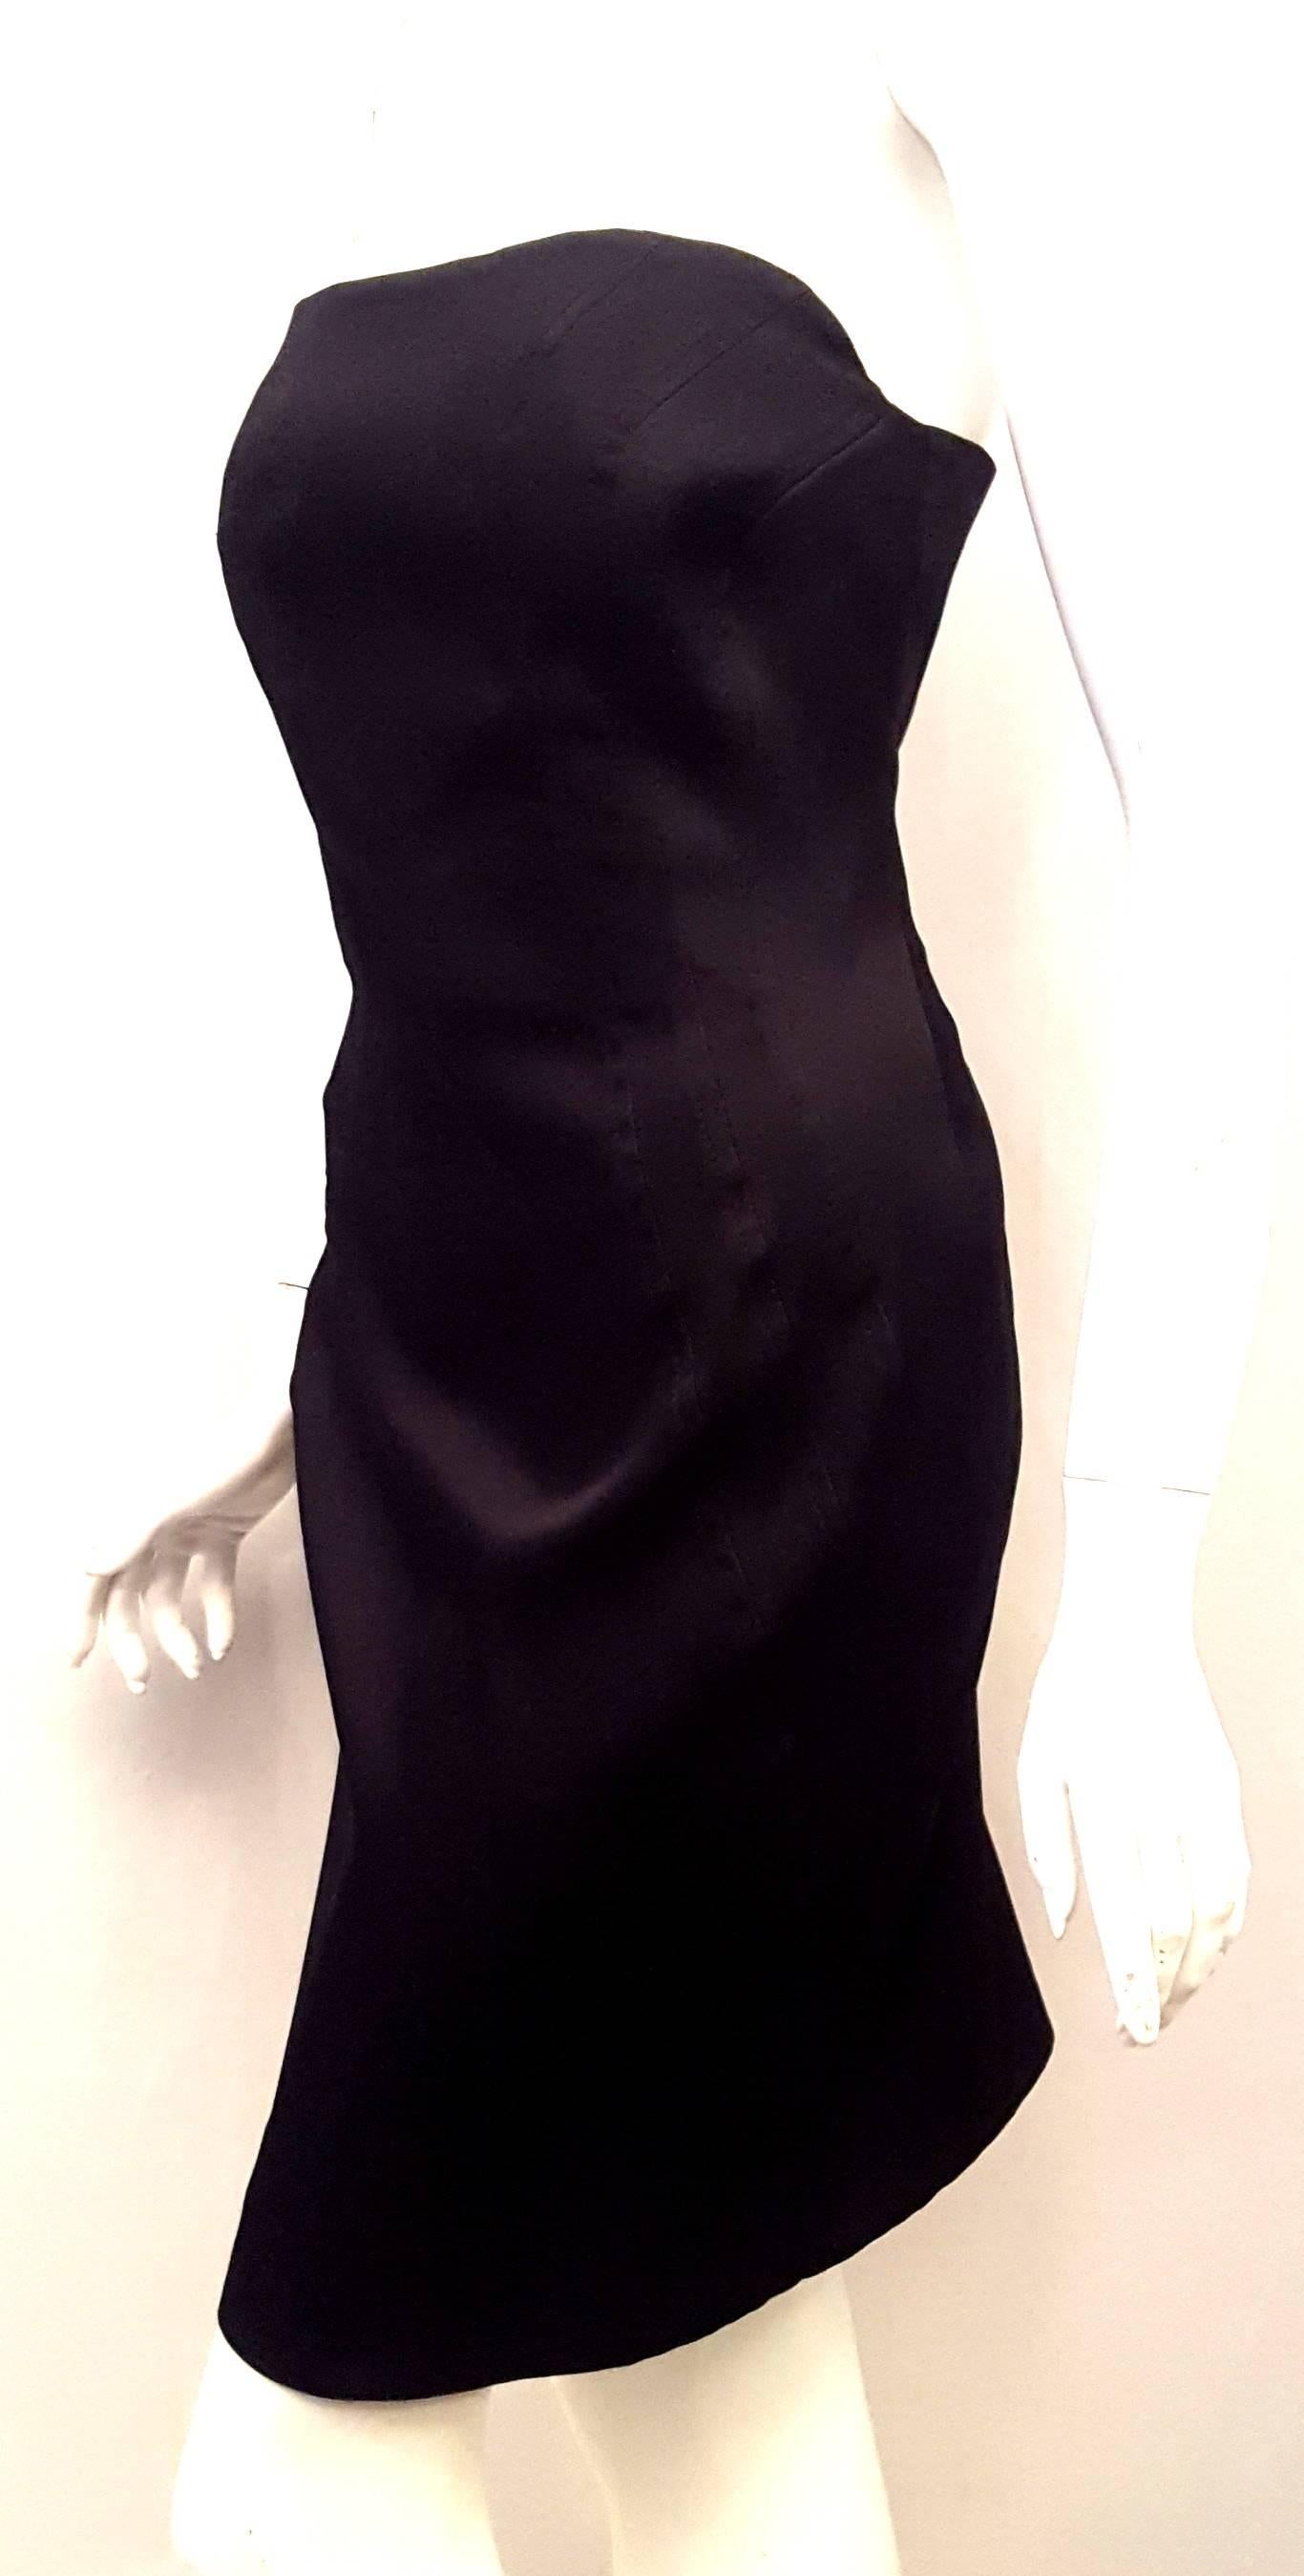 This Escada black strapless dress crafted luxuriously as stipulated by the House of Escada is a bit more than the run of the mill LBD.  This Escada dress has a bustier style bodice with an inner corset for lifting and tighting.  For closure this